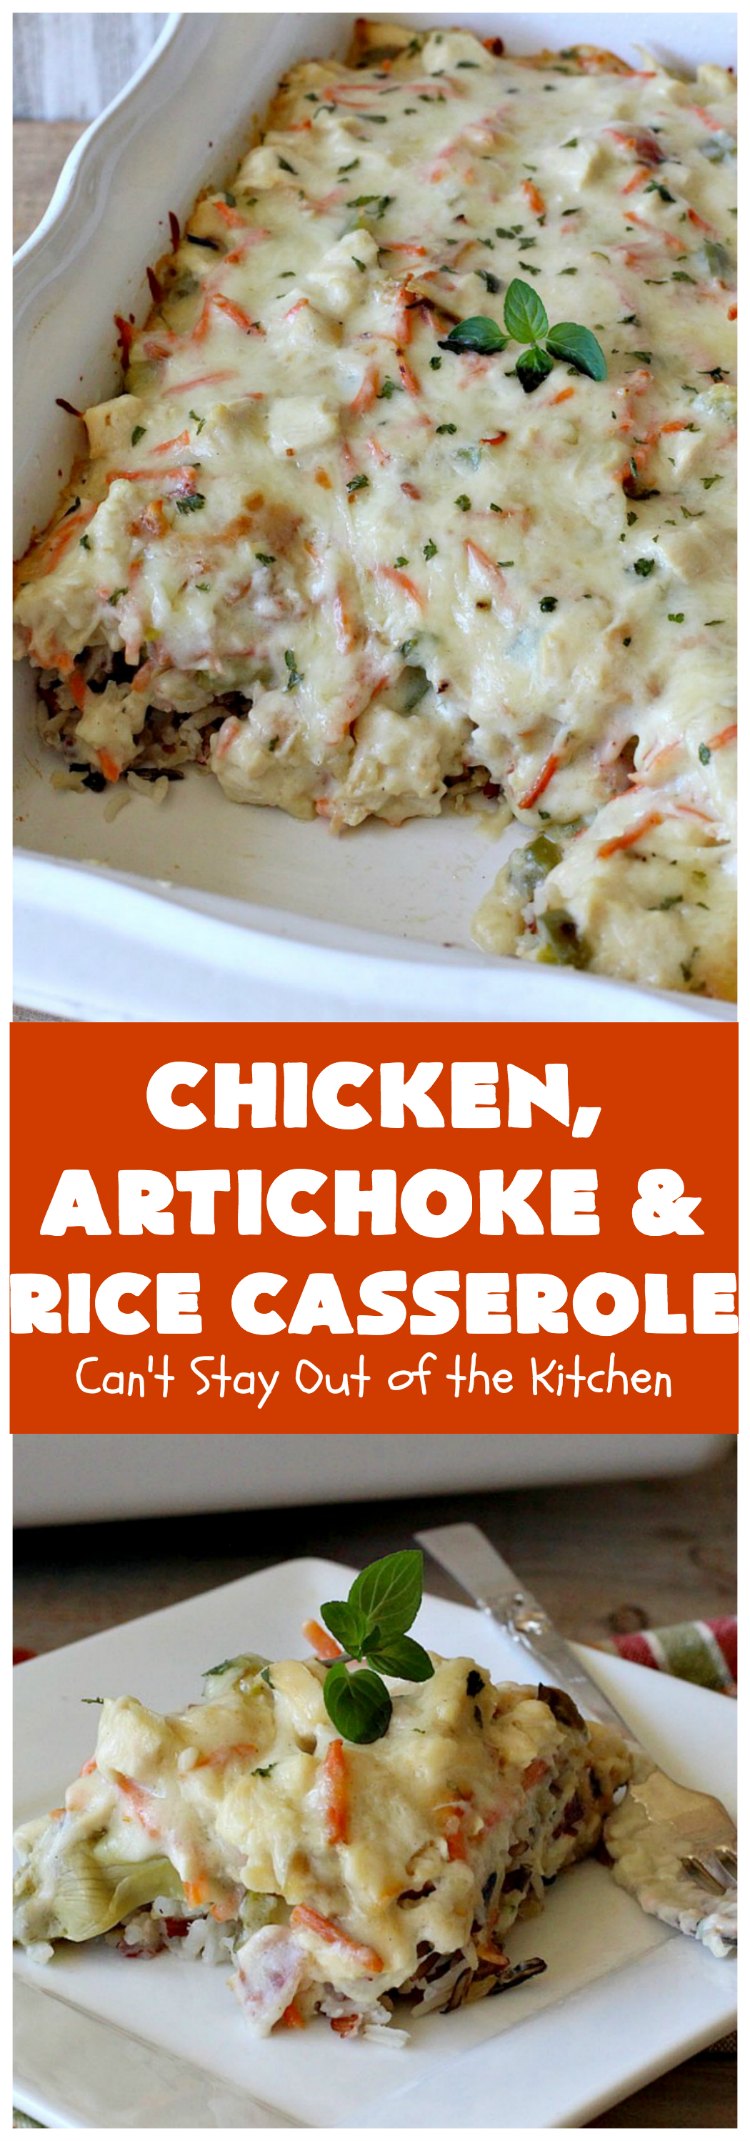 Chicken, Artichoke and Rice Casserole | Can't Stay Out of the Kitchen | this lovely #ChickenCasserole is perfect for company & tastes utterly amazing. #chicken #rice #carrots #artichokes #casserole #ChickenArtichokeAndRiceCasserole